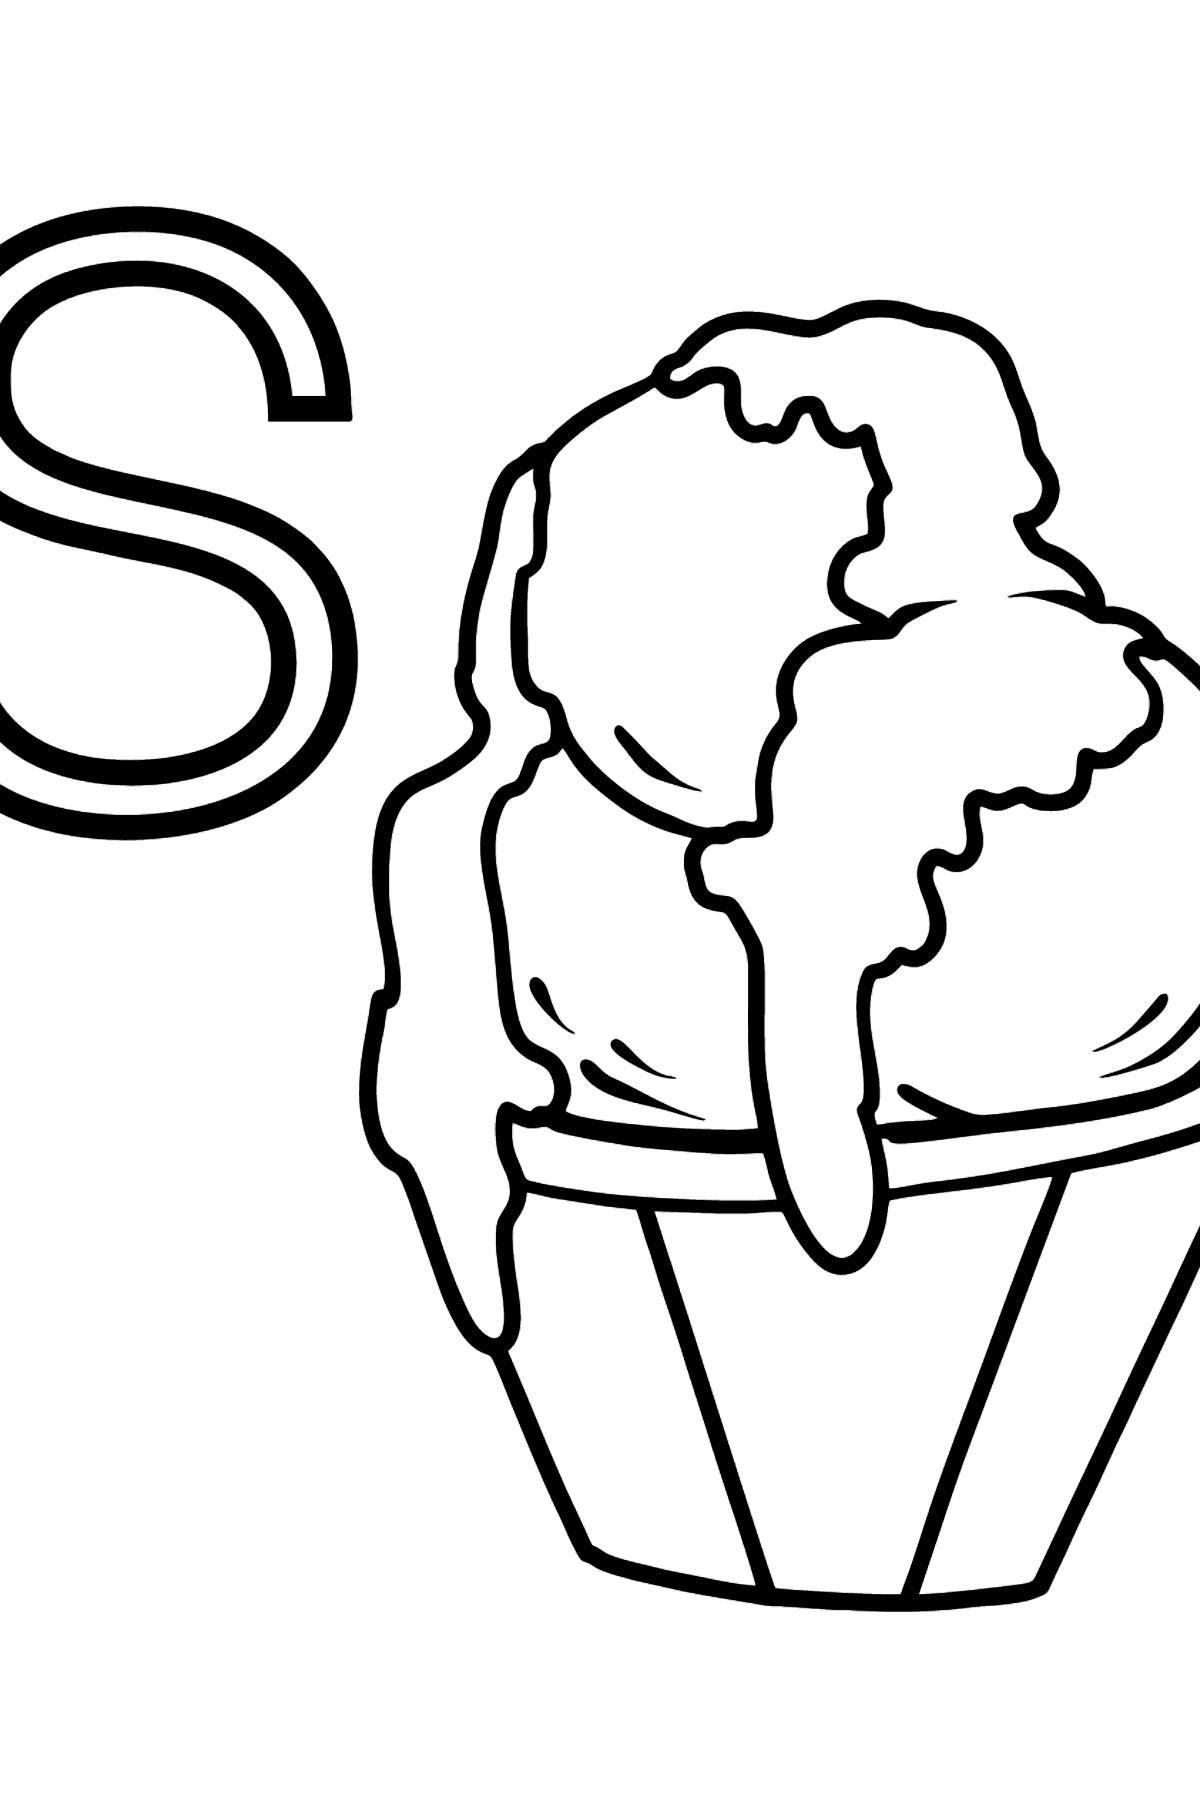 Spanish Letter S coloring pages - SORBETE - Coloring Pages for Kids